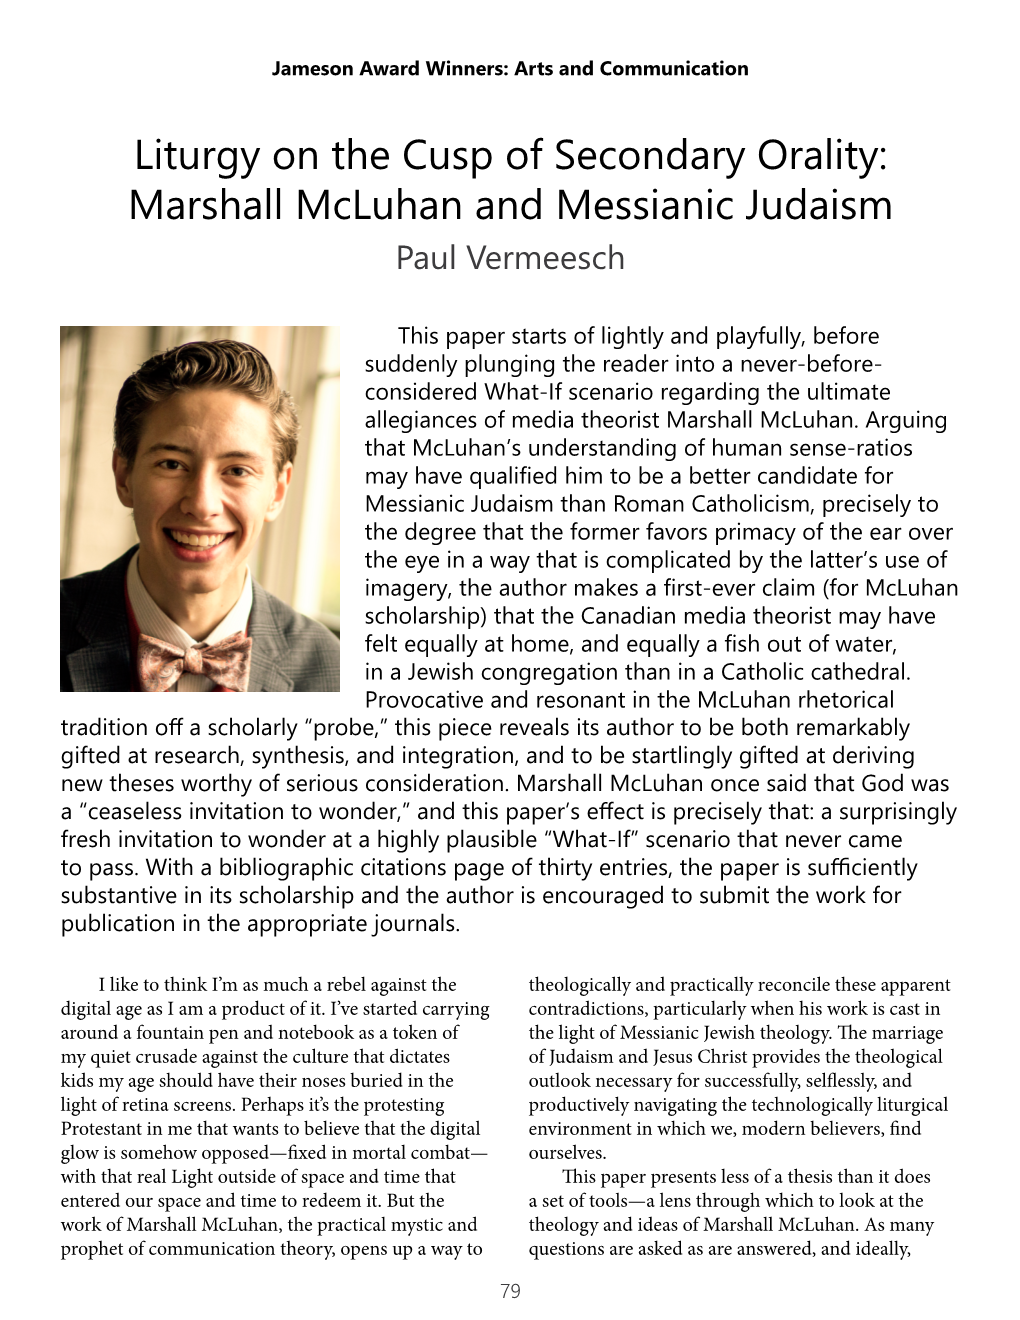 Liturgy on the Cusp of Secondary Orality: Marshall Mcluhan and Messianic Judaism Paul Vermeesch